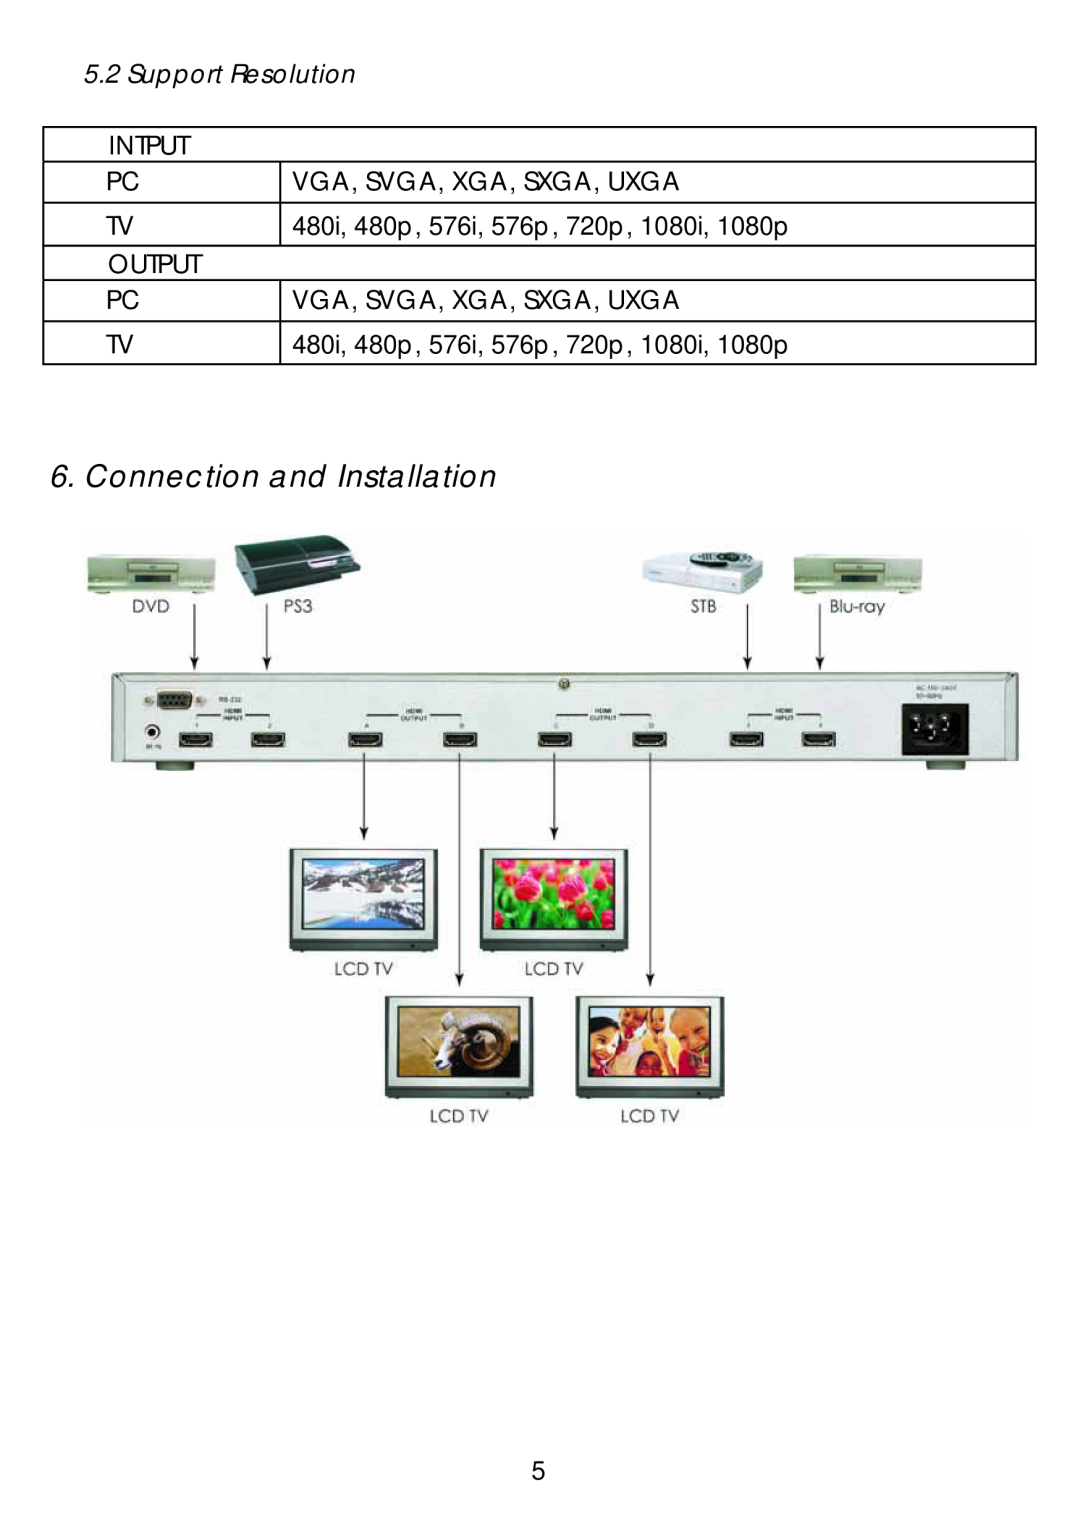 Video Products SM-4X4-HDMI-LC manual Connection and Installation, Support Resolution, Intput, Output 